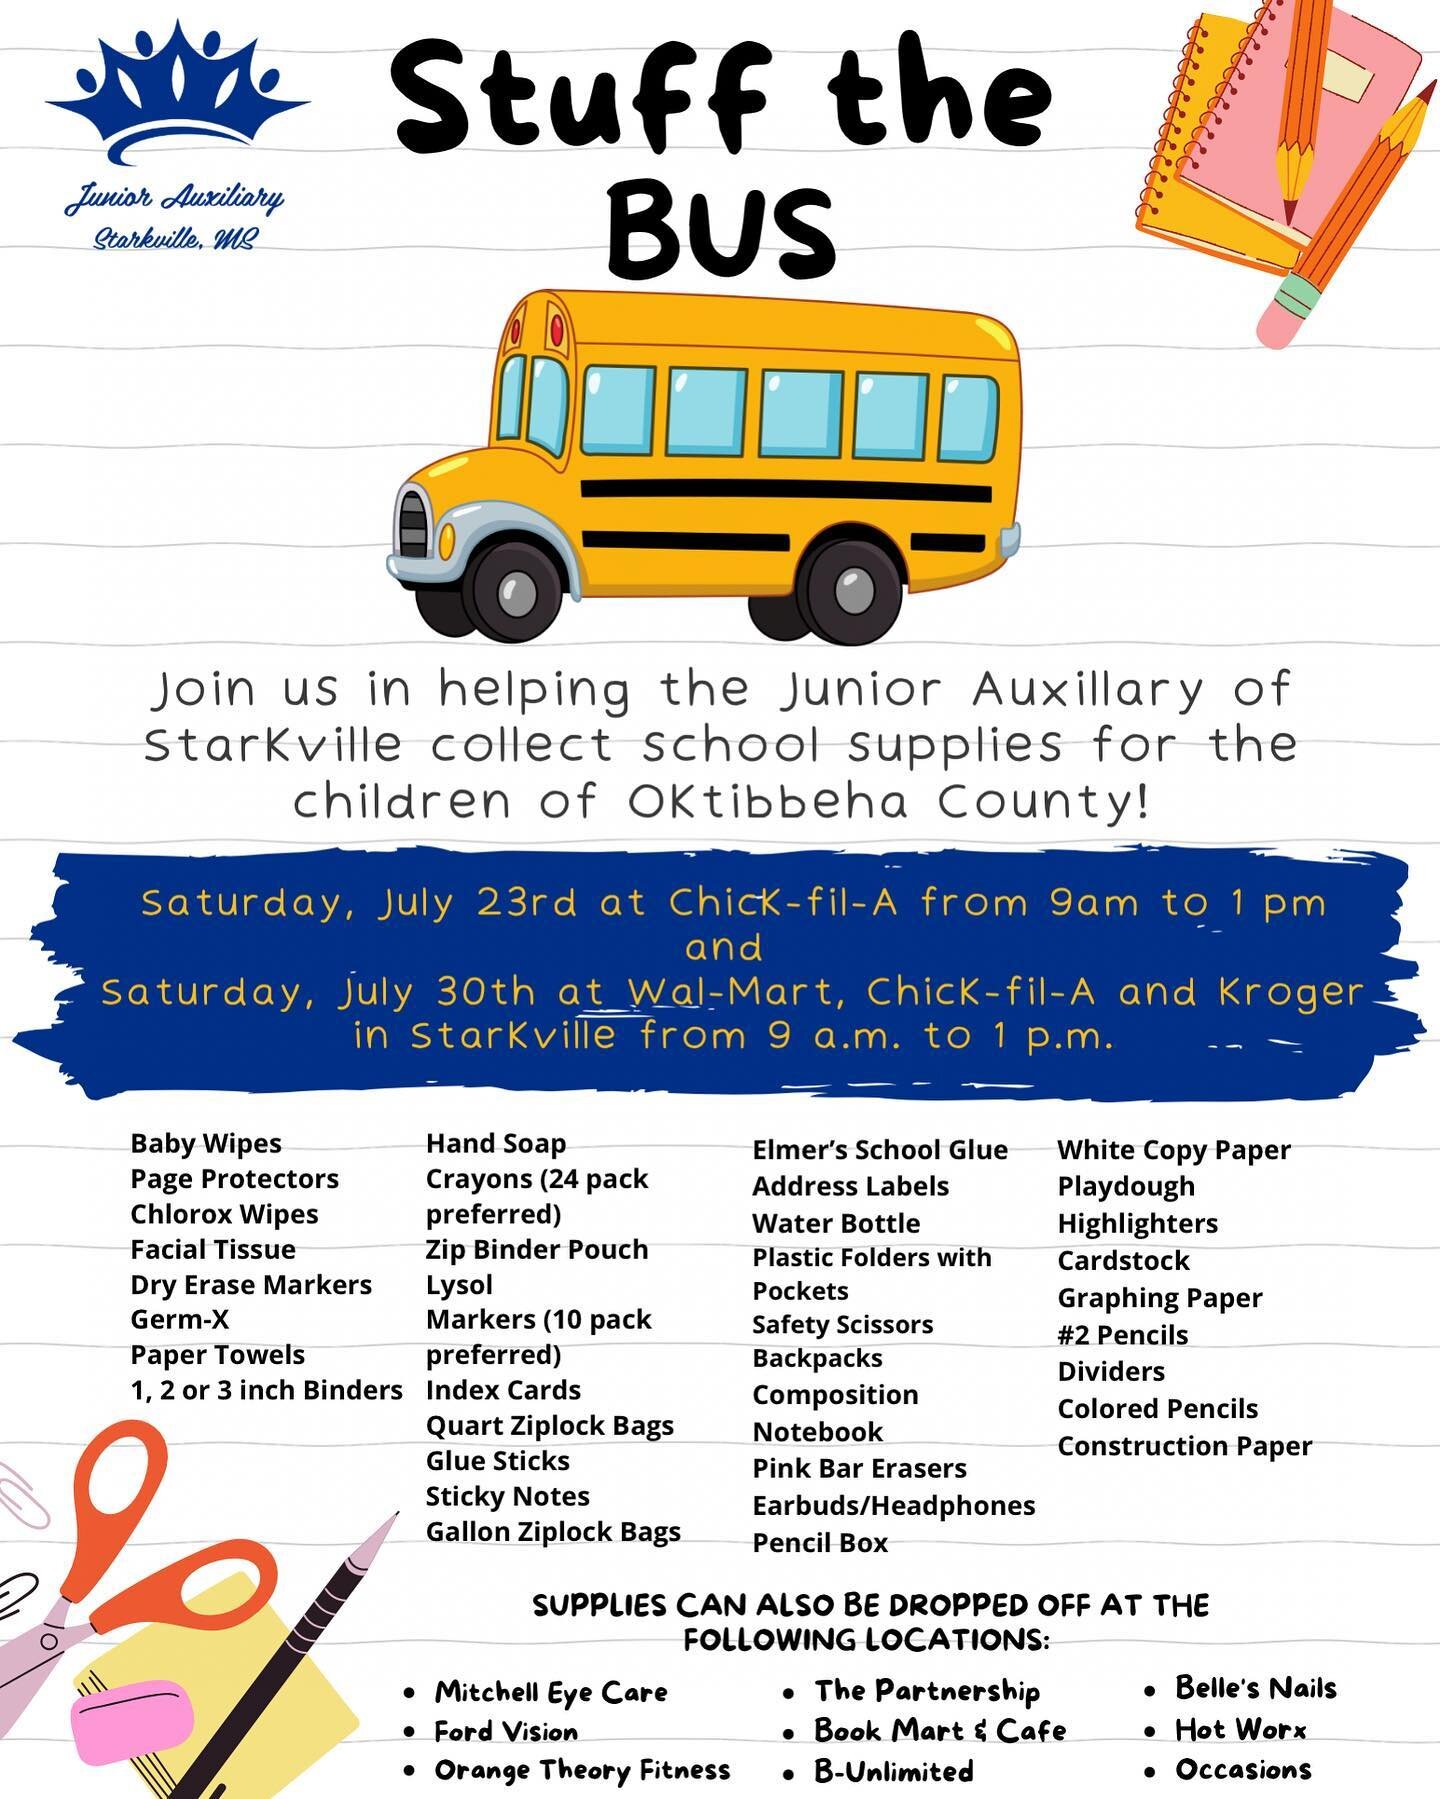 Stuff the Bus 2022!!
&bull;
Take note, due to the change of school start dates this year, we are also changing up our Stuff the Bus event so we can do our best to get school supplies to teachers by the time school starts. However, we will still be co